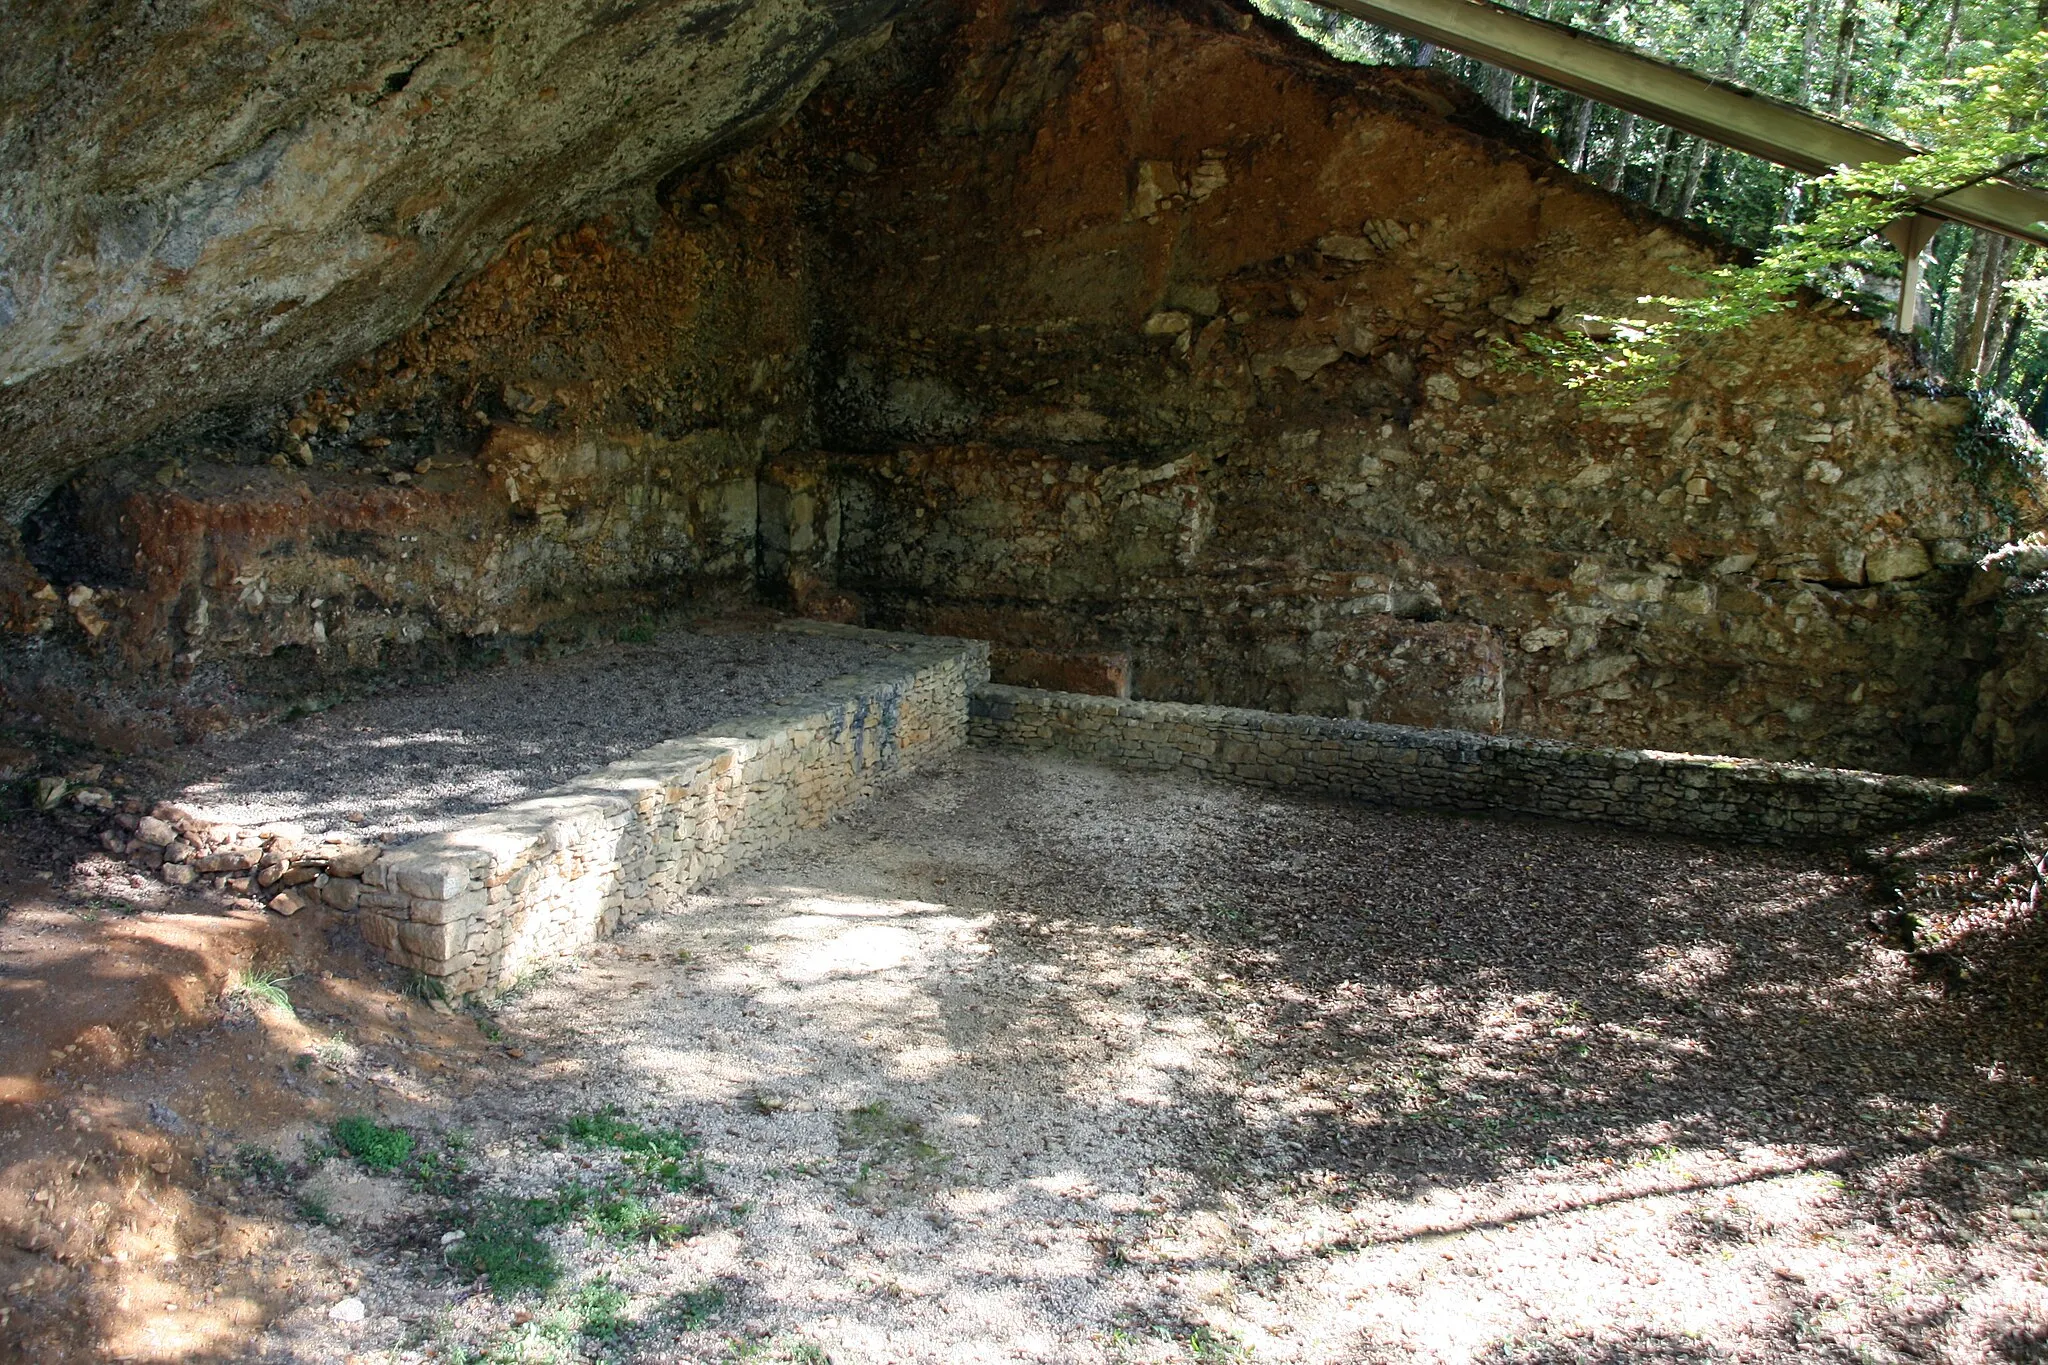 Photo showing: The great rockshelter ("Grand abri") of La Ferrassie, Savignac-de-Miremont, Dordogne, France. This site was occupied by Neanderthals, between roughly 45,000 and 38,300 years BP.